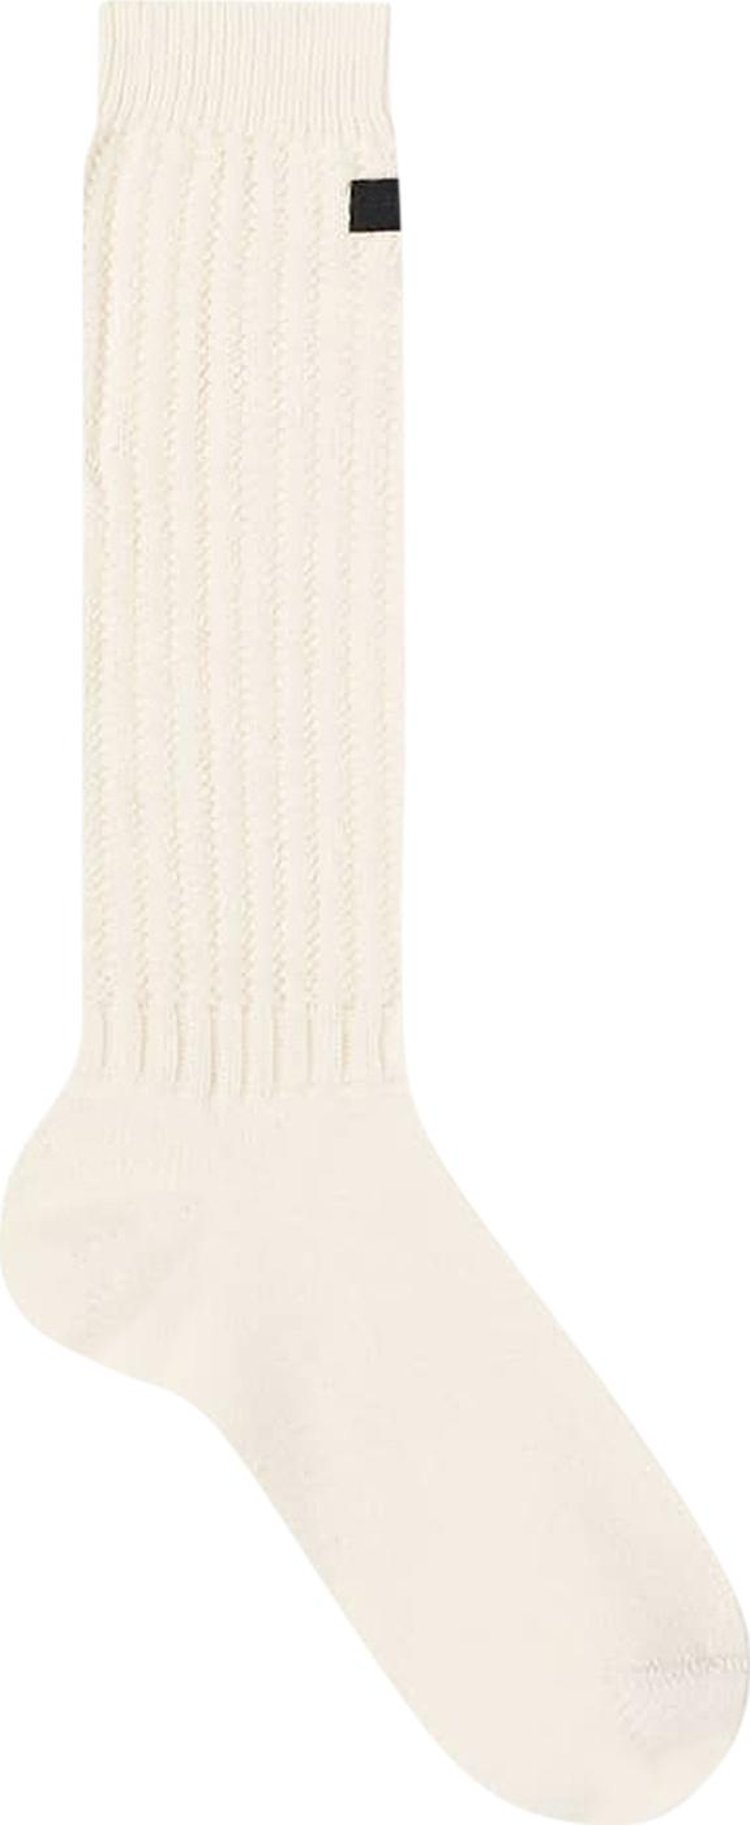 Fear of God 7th Collection Socks 'Cream'